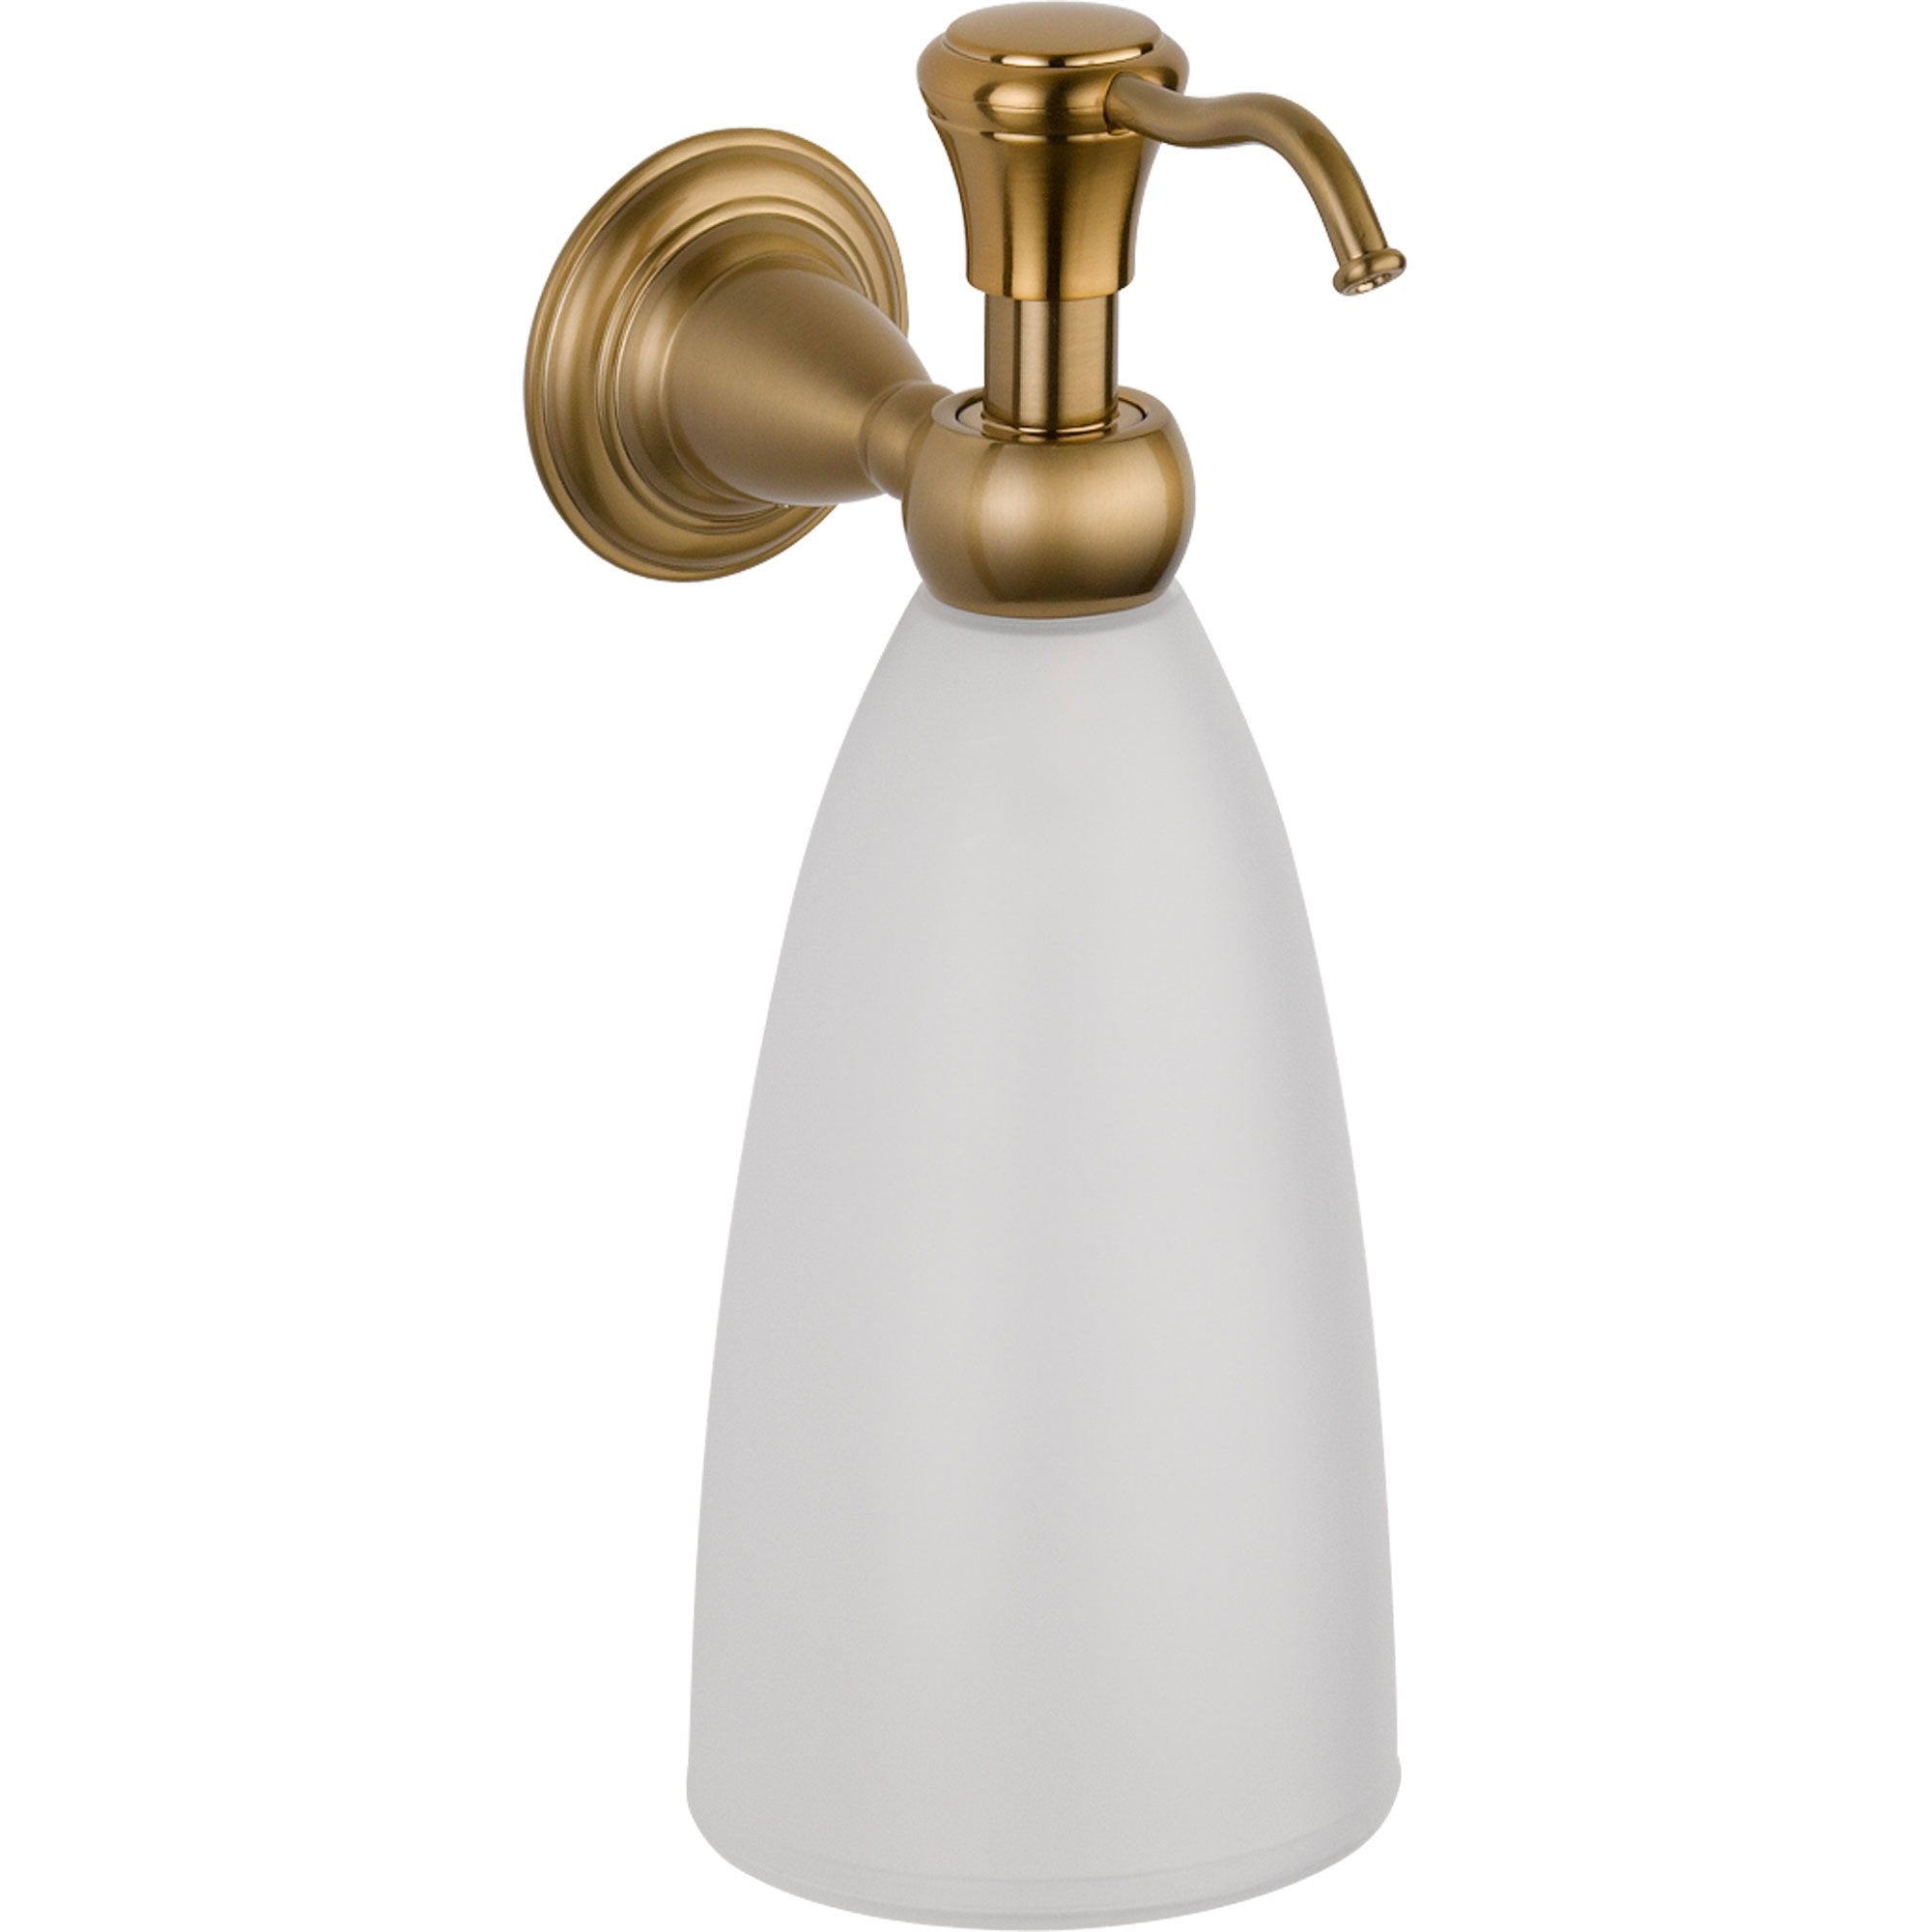 Toothbrush / Tumbler Holder in Champagne Bronze 75056-CZ